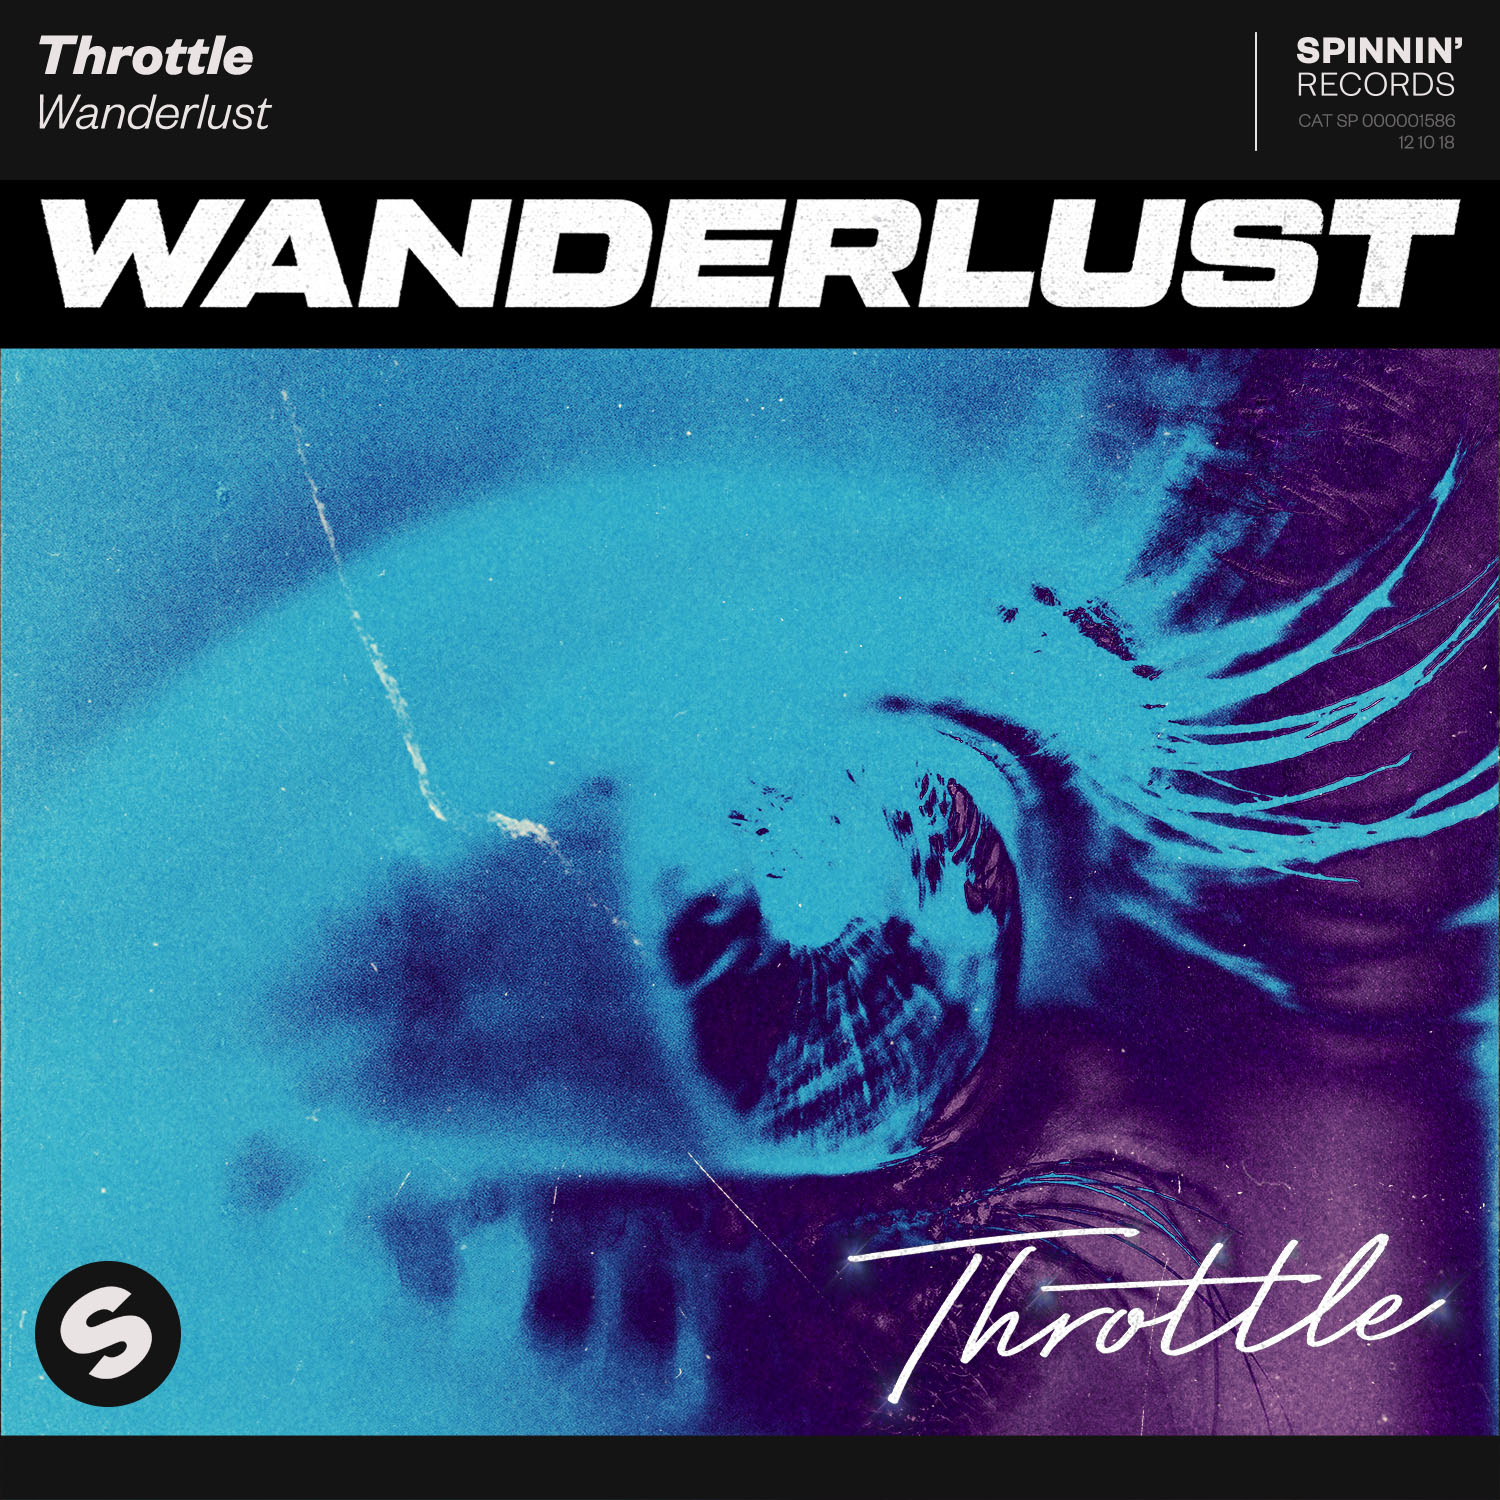 Throttle Is Out on Spinnin’ with “Wanderlust”